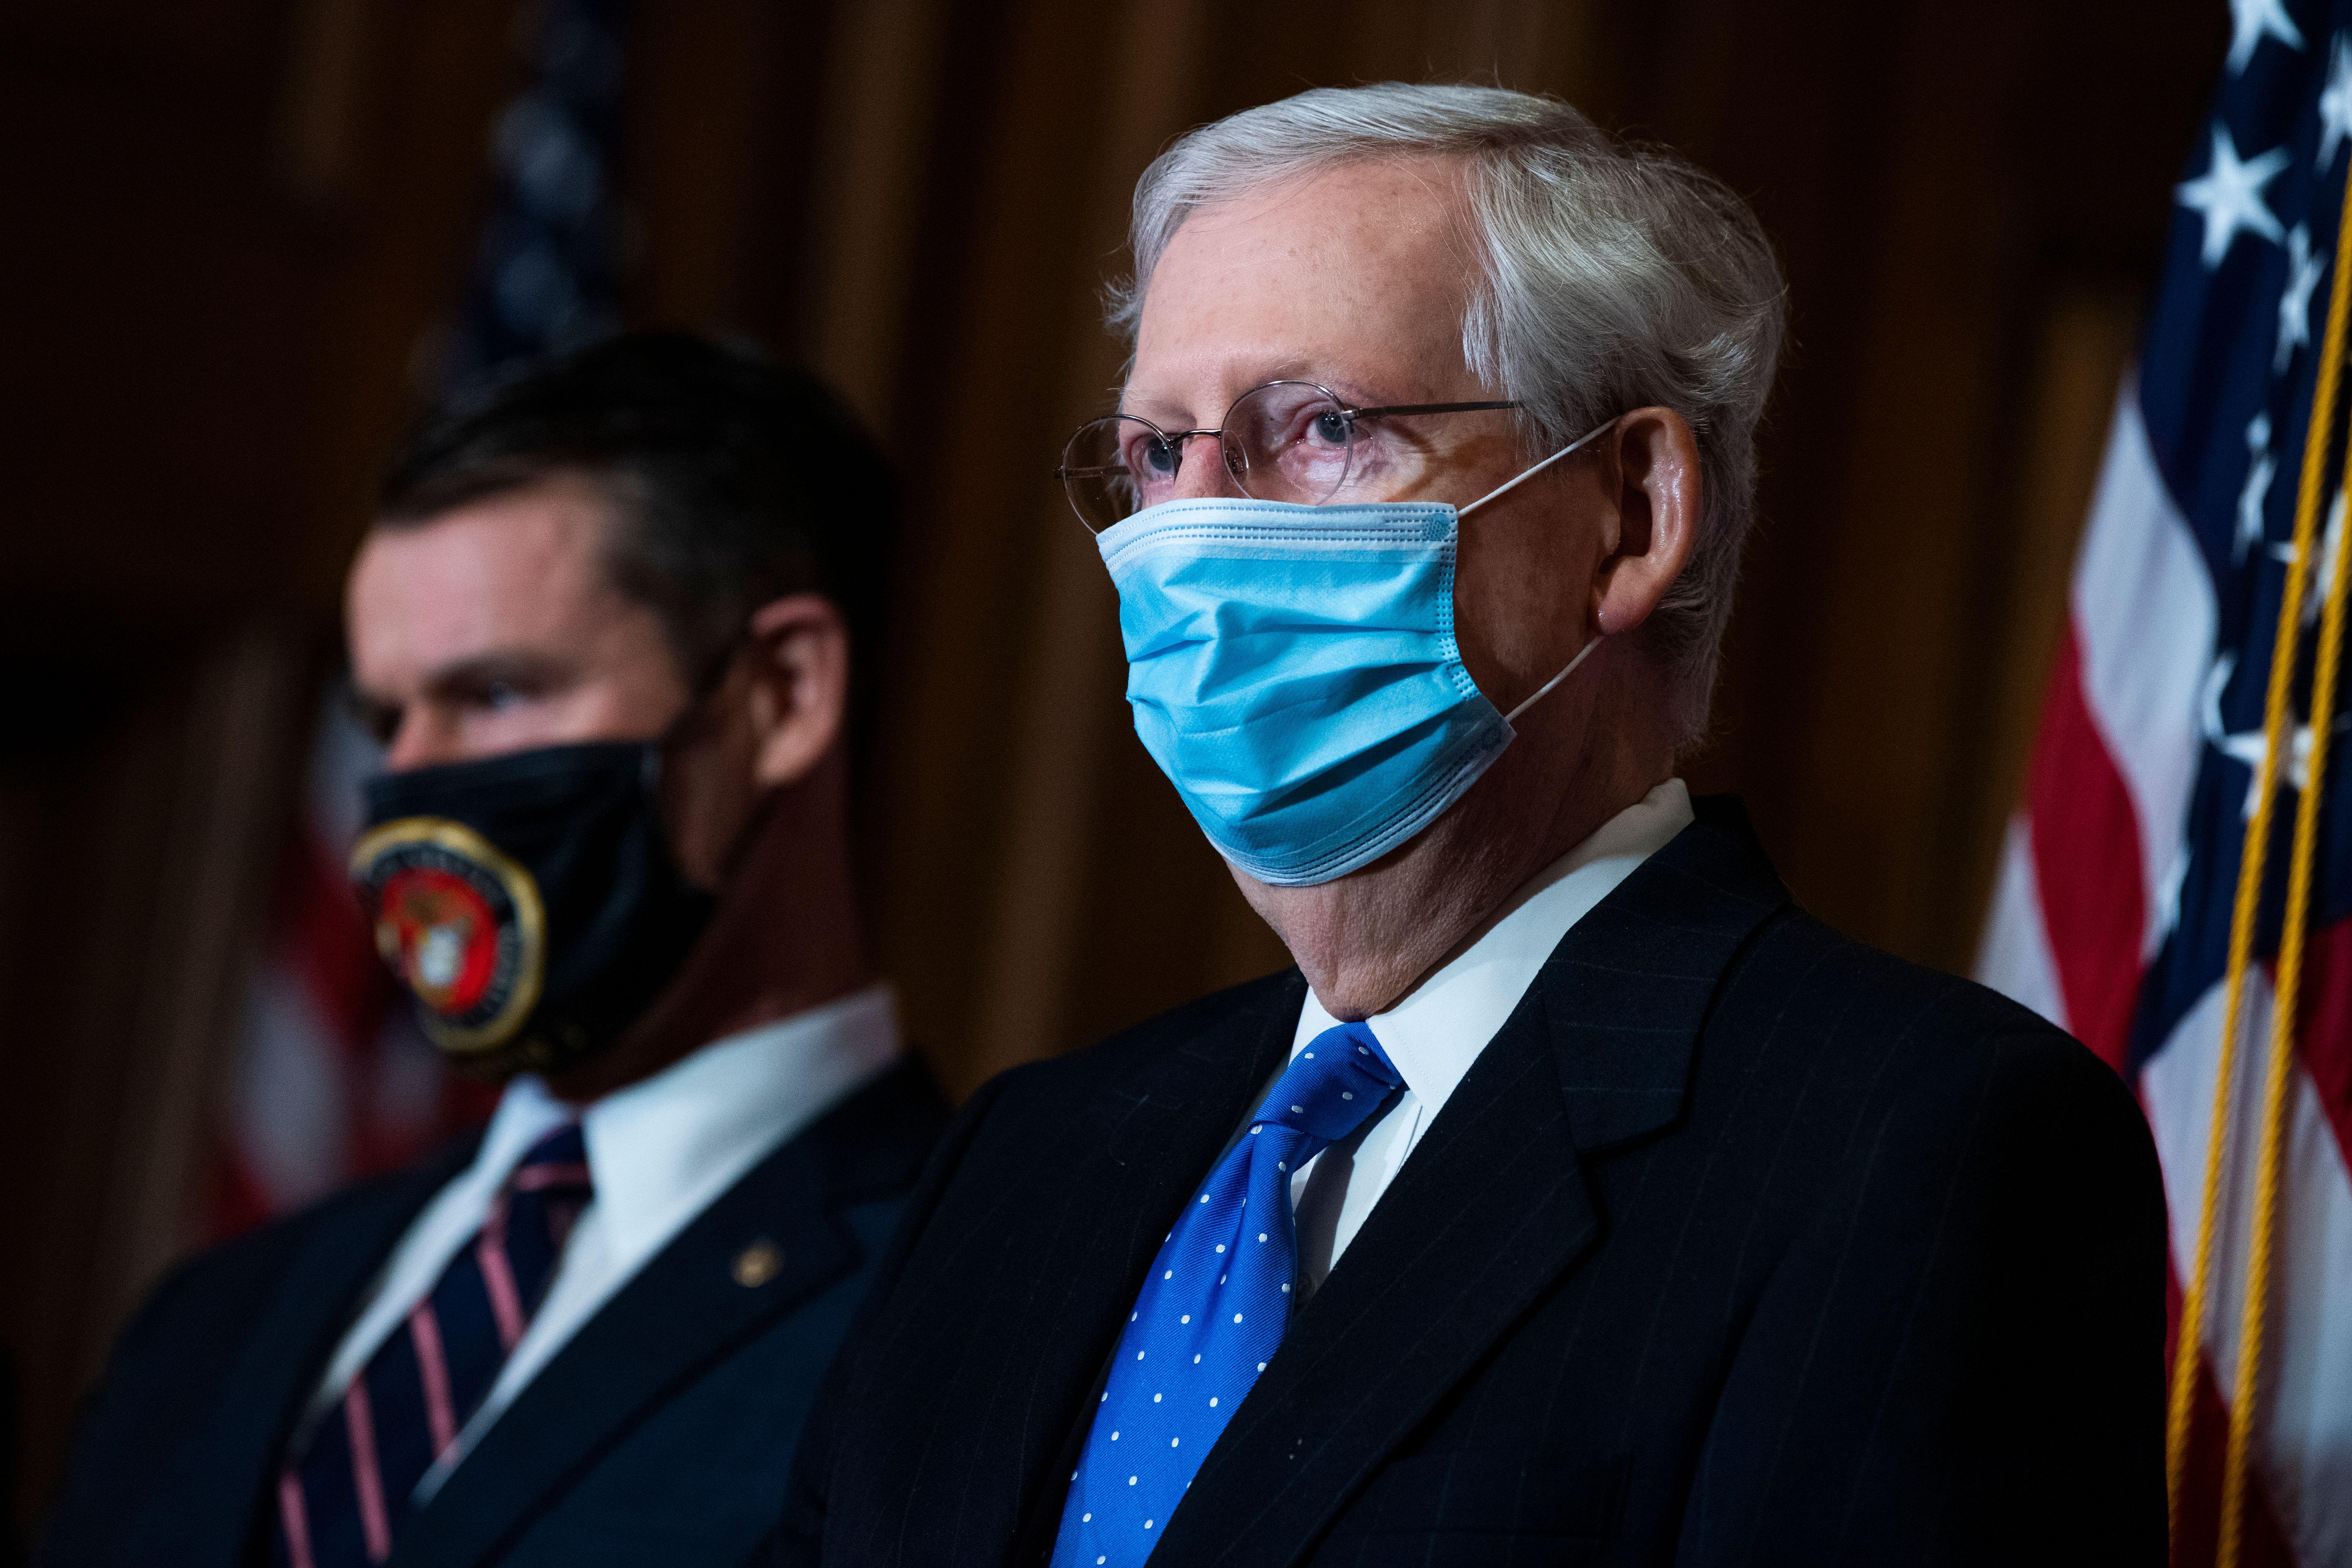 Mitch McConnell in a mask with a masked male colleague standing next to him.